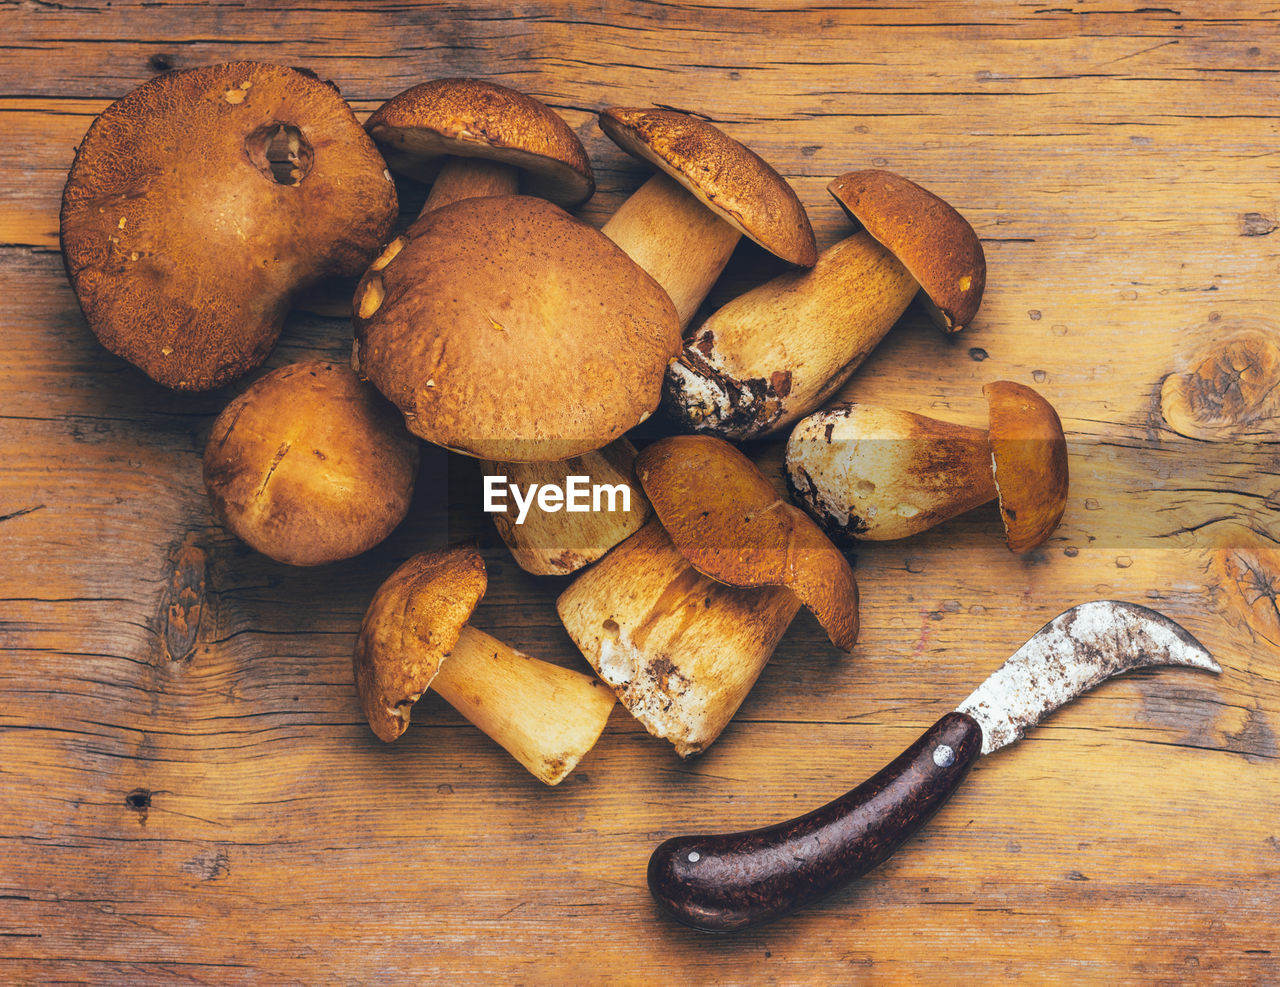 A bunch of boletus mushrooms and a knife on a wooden table top view close-up